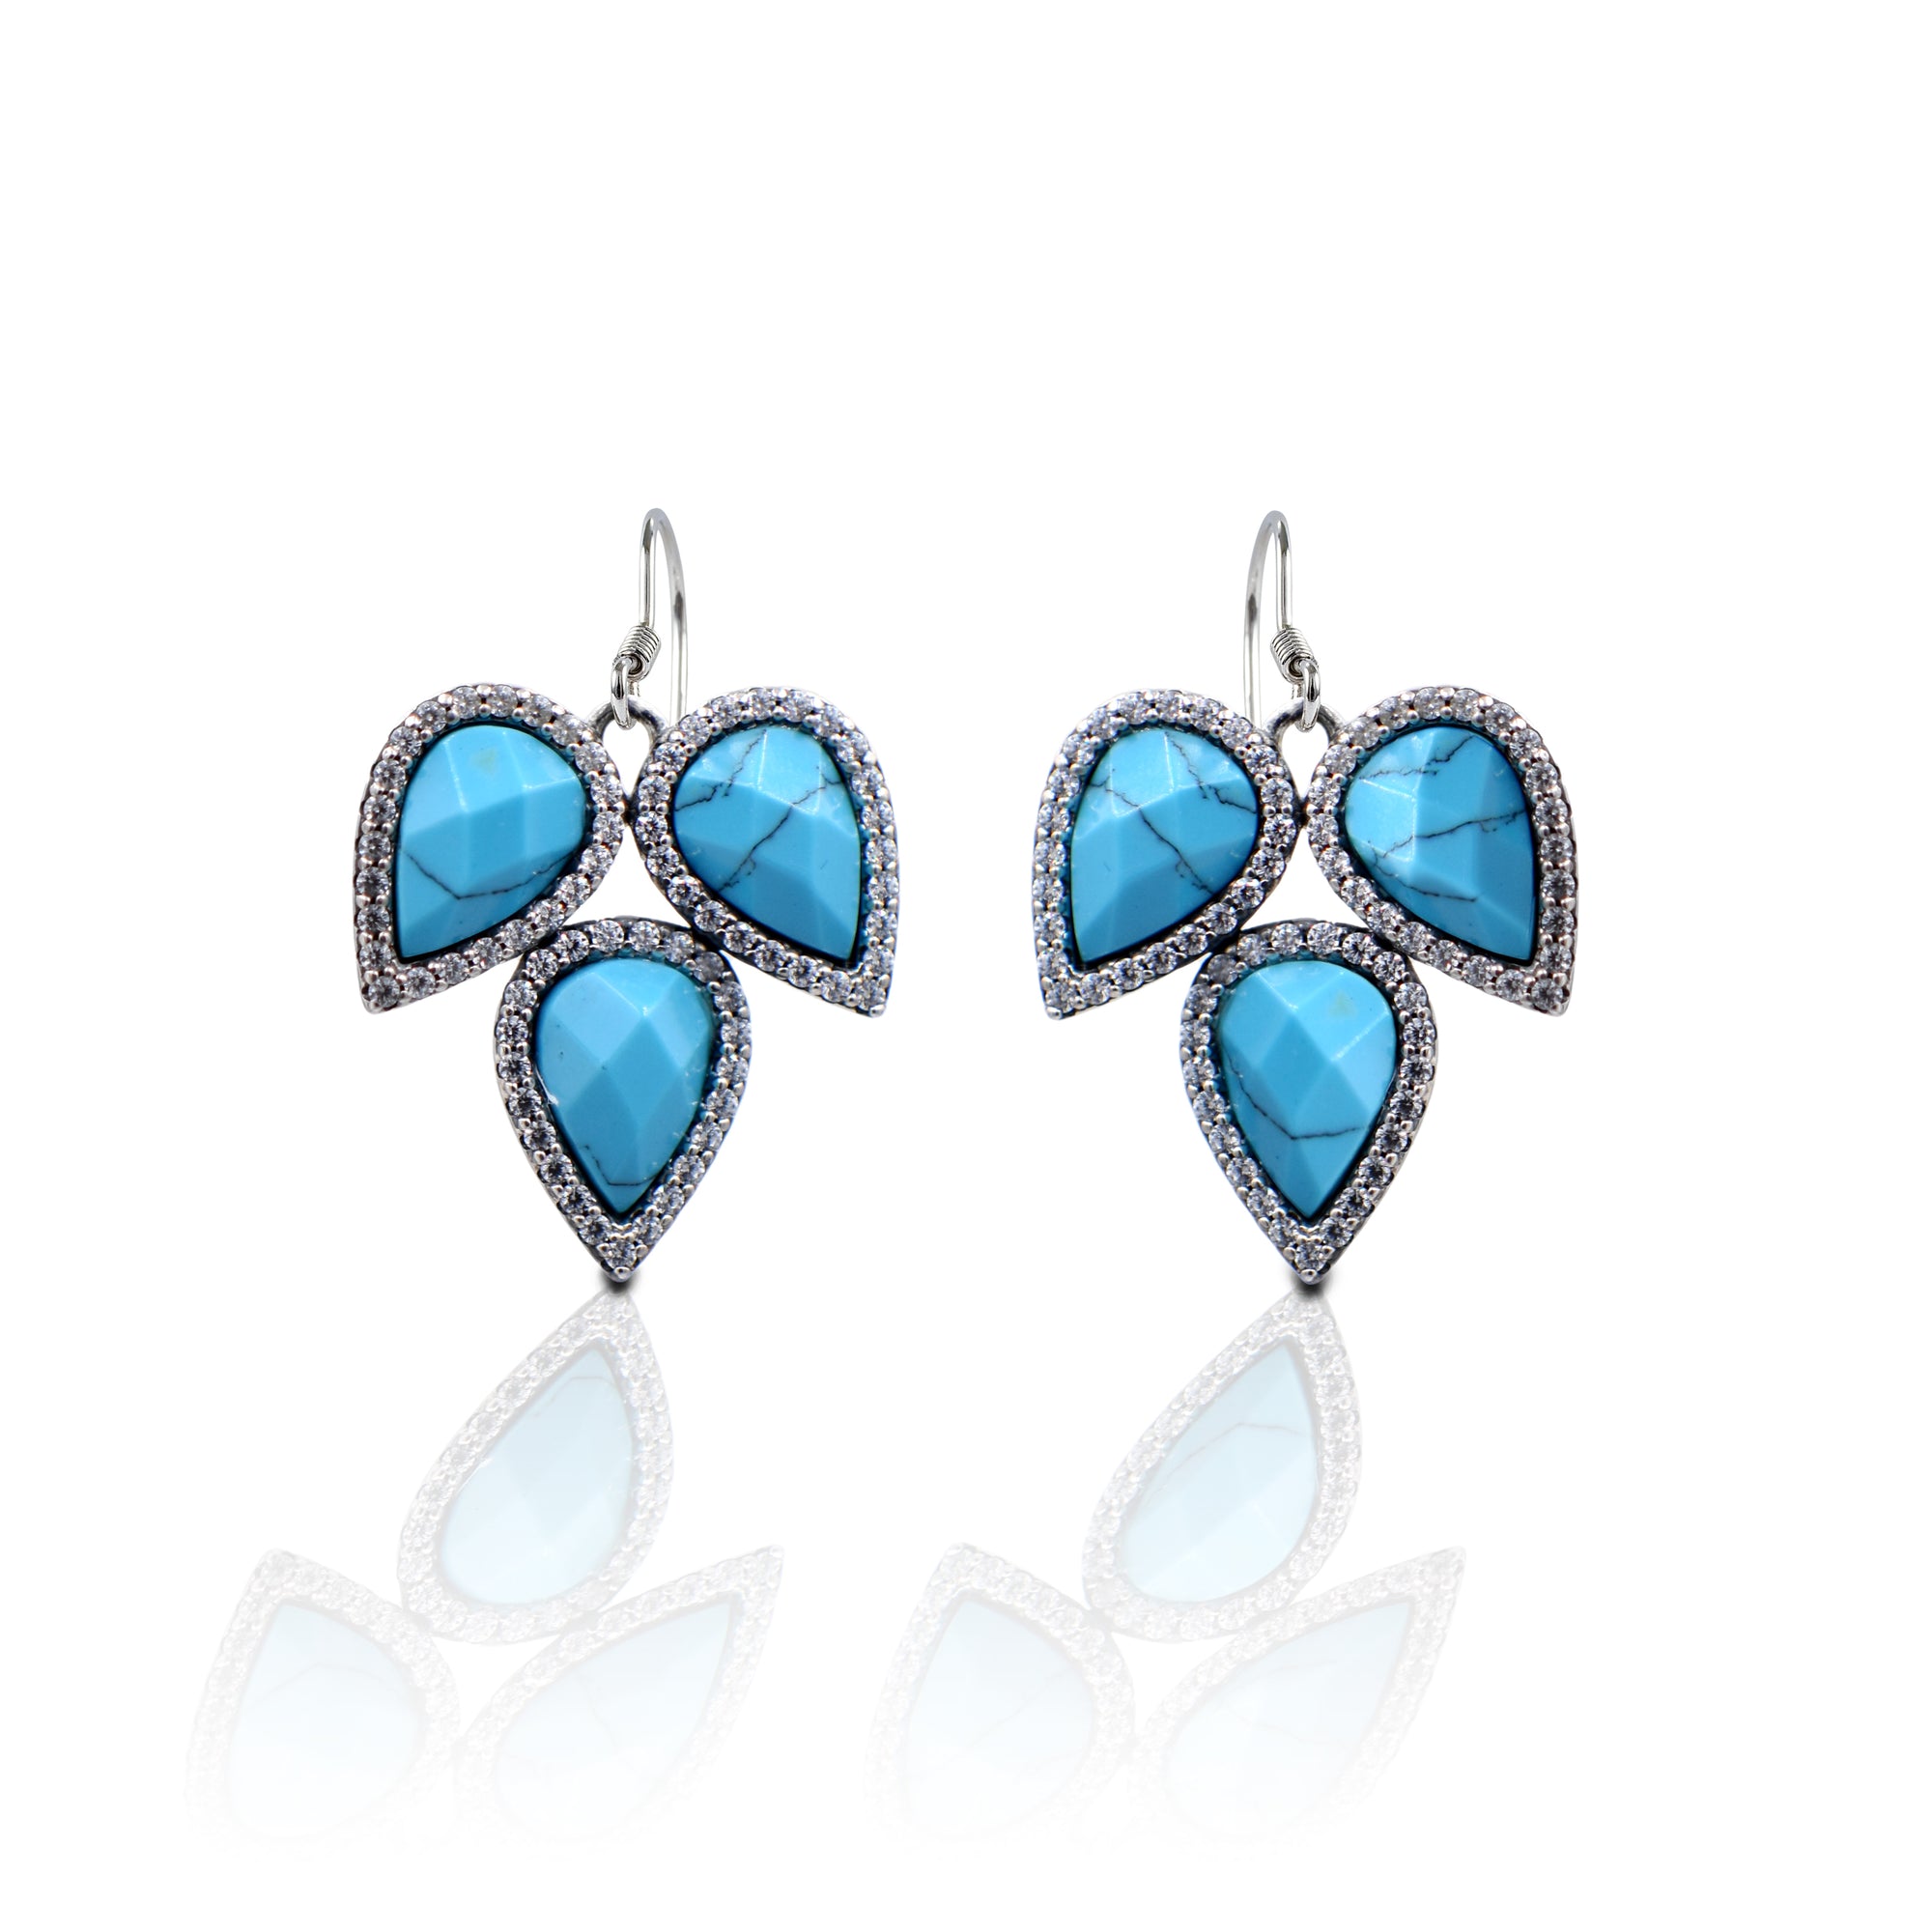 The Kelly Herd Three Teardrop Turquoise Hook Earrings have a unique Southwest appeal. They are a must have for anyone with a western sense of style. The turquoise details of the teardrops are accented with brilliantly sparkling cubic zirconia stones. These pair perfectly with the Kelly Herd Turquoise Teardrop Pendant Necklace.    Features      Western Teardrop Design     Enhanced with Clear Cubic Zirconia Stones     Dangle Hook Style     Sterling Silver     Measures 23mm high and 21mm wide